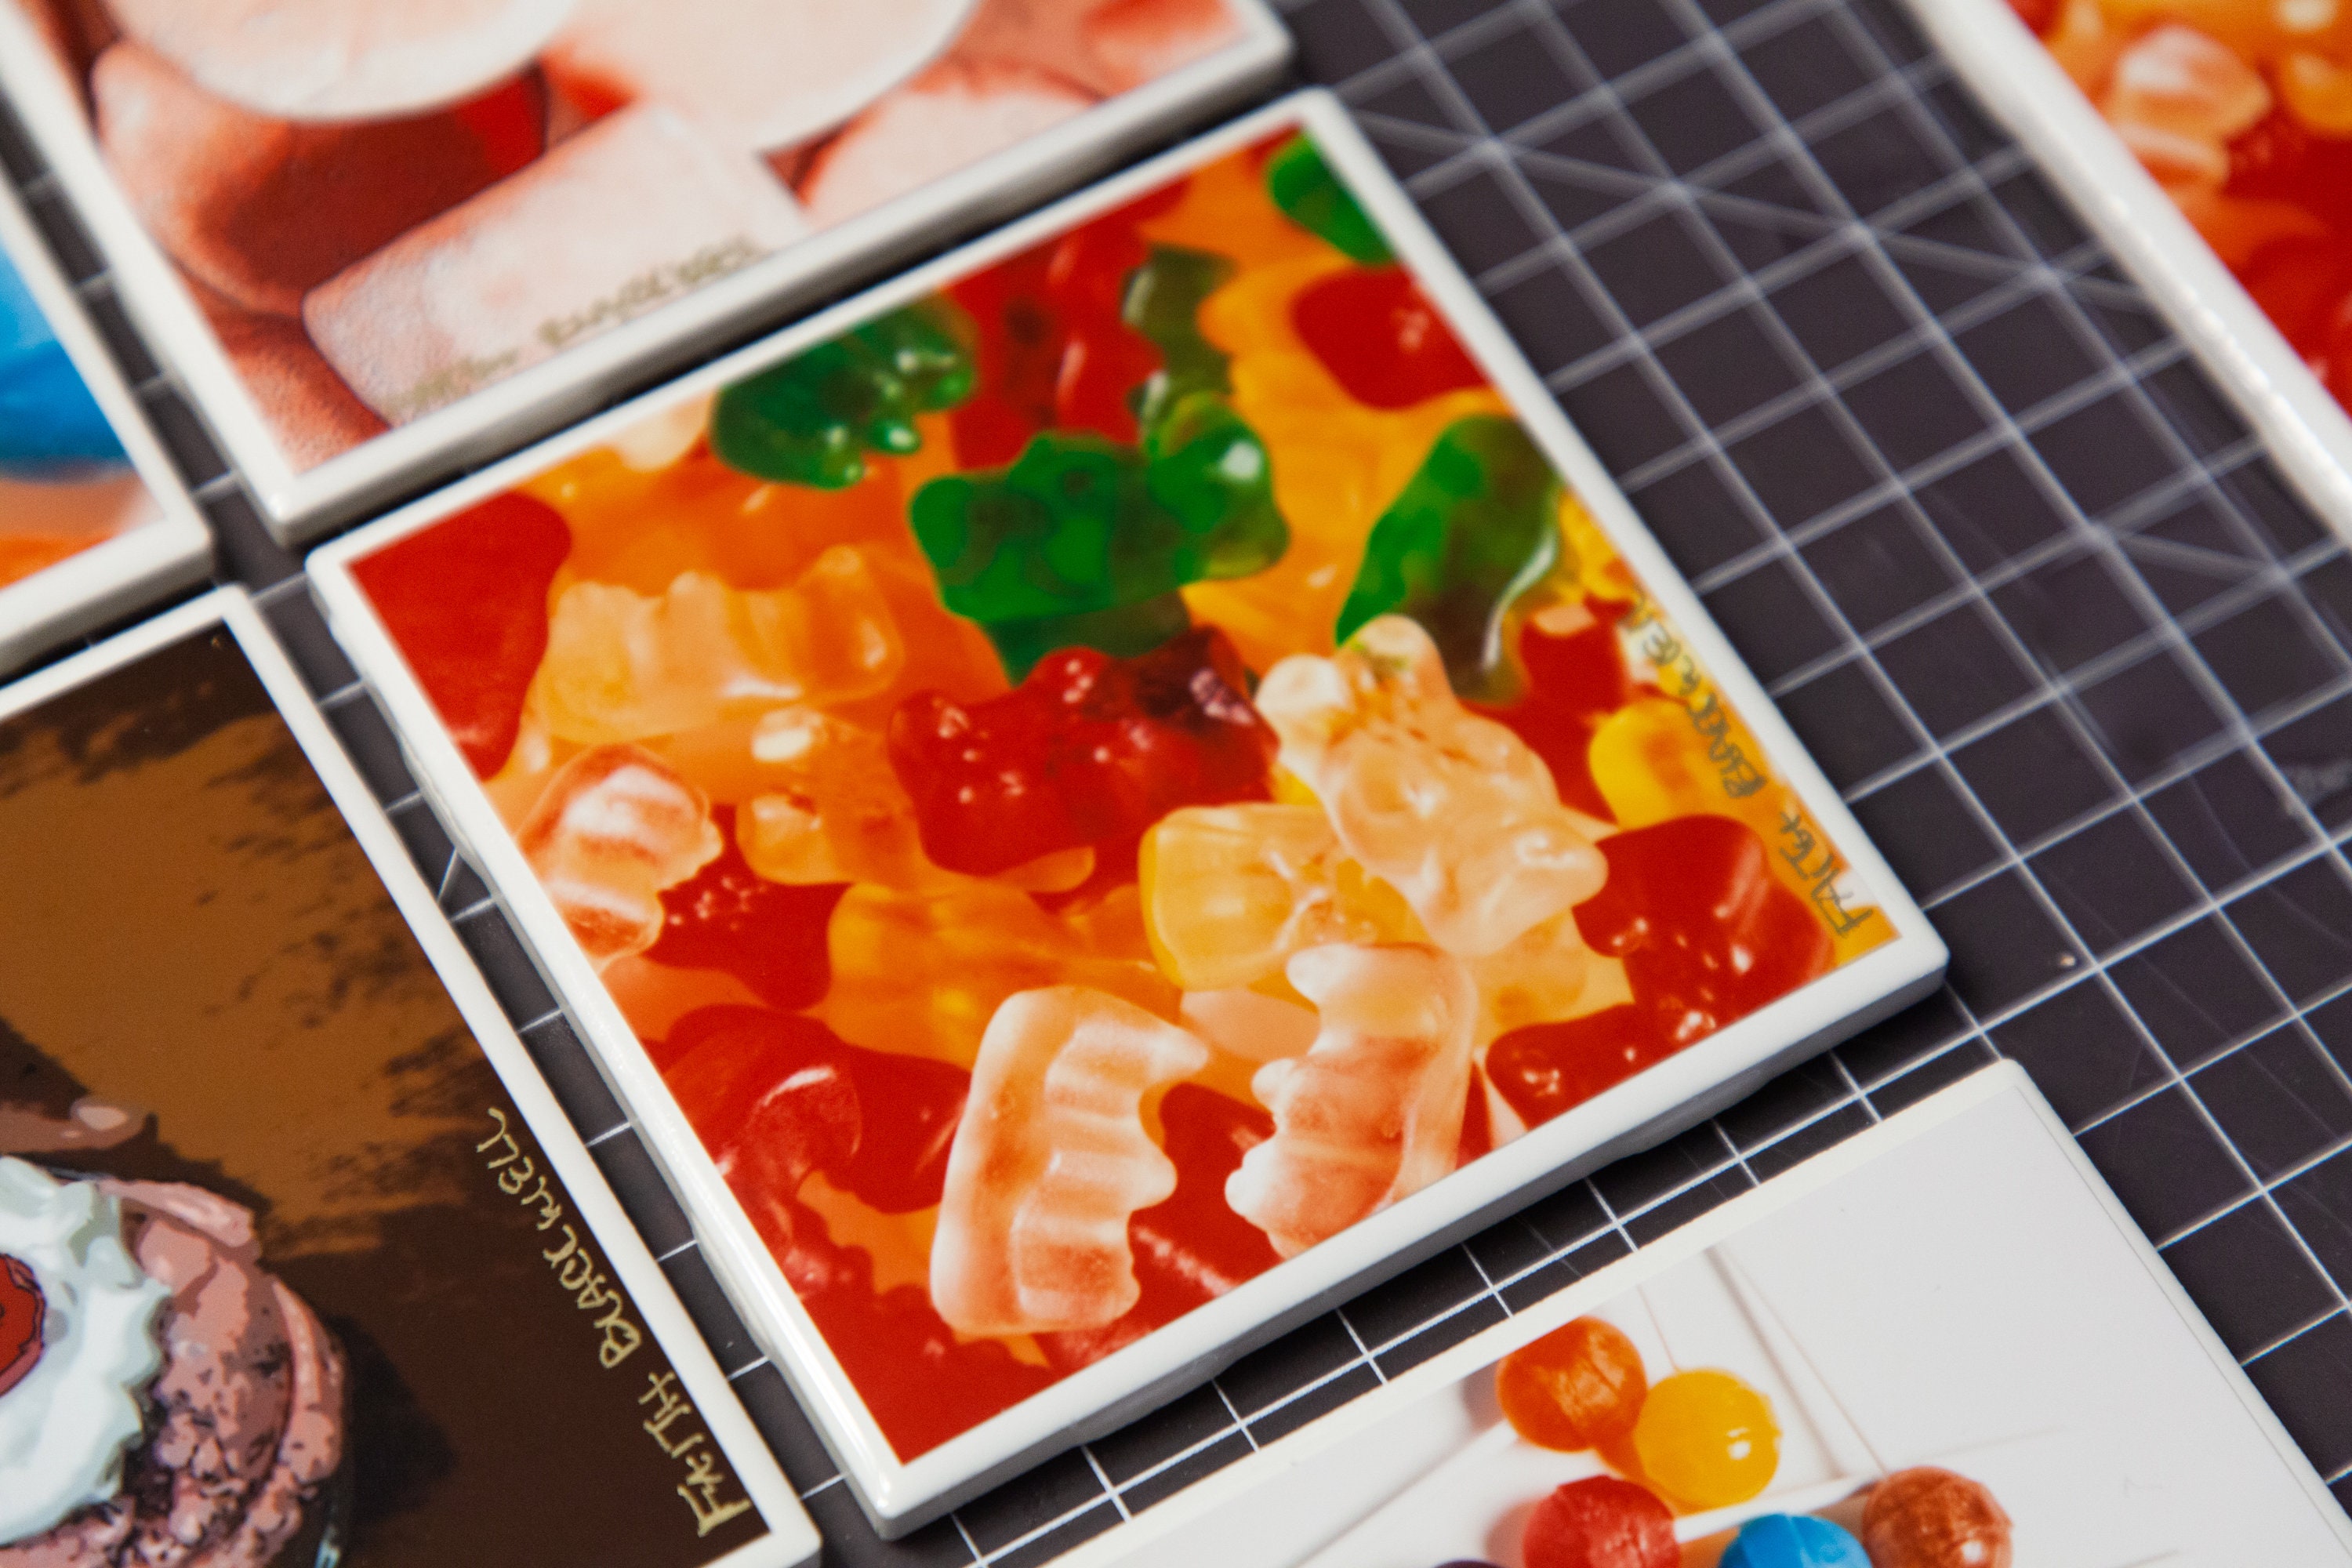 King Gummy Bear Resin Set King & Small Included Colors of your choice!